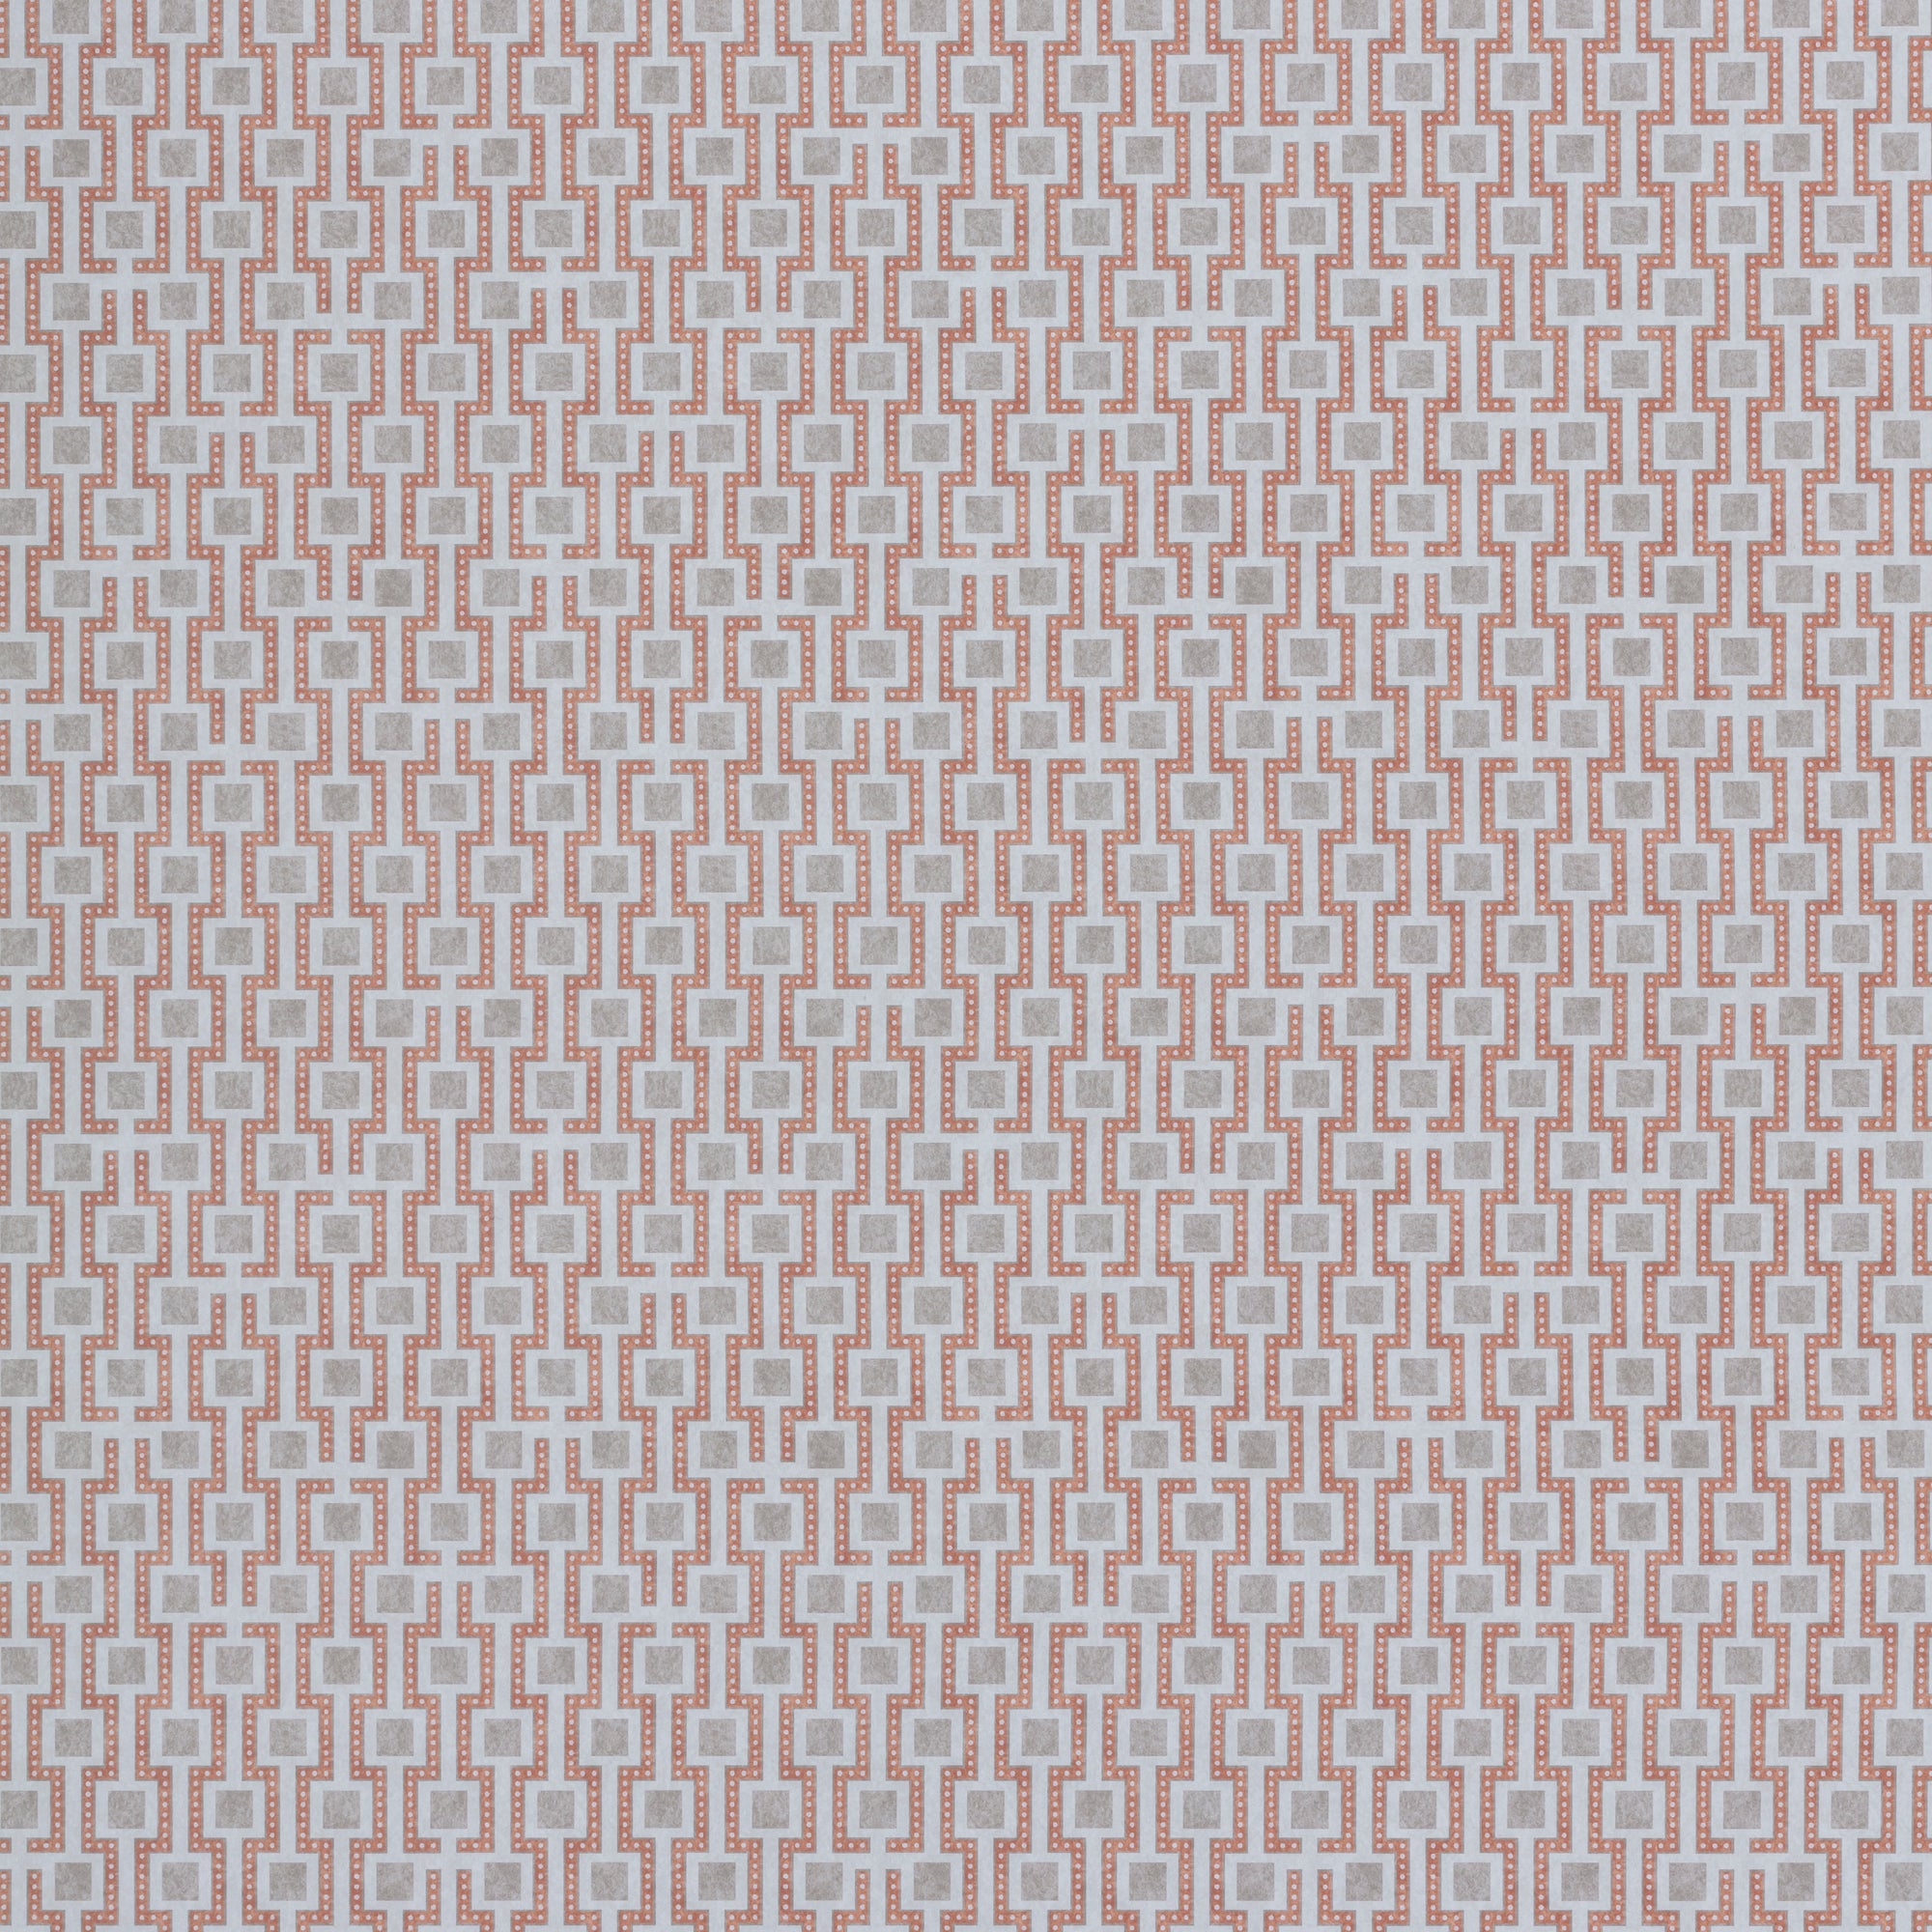 Wallpaper panel in a geometric grid print in shades of pink and gray.